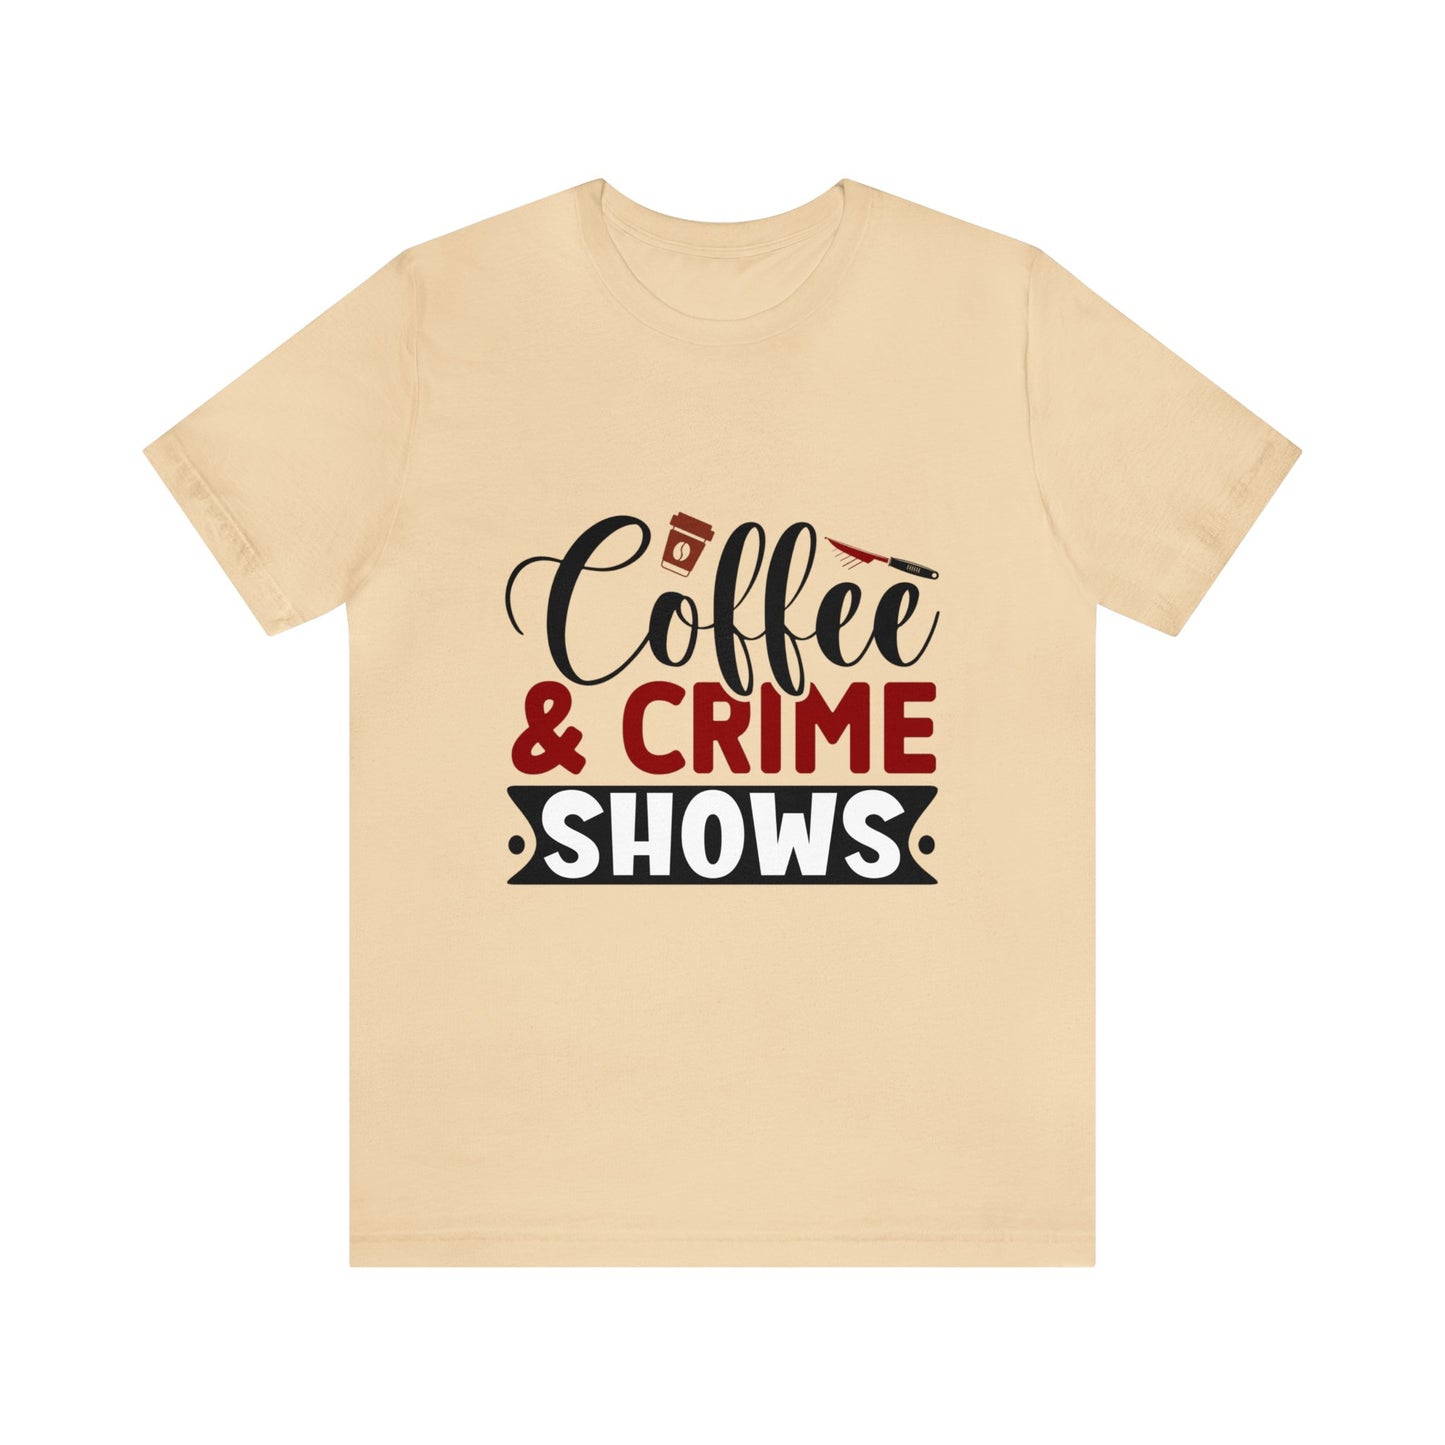 THREE COLORS “Coffee & Crime Shows” Bella+Canvas Jersey Short Sleeve Tee